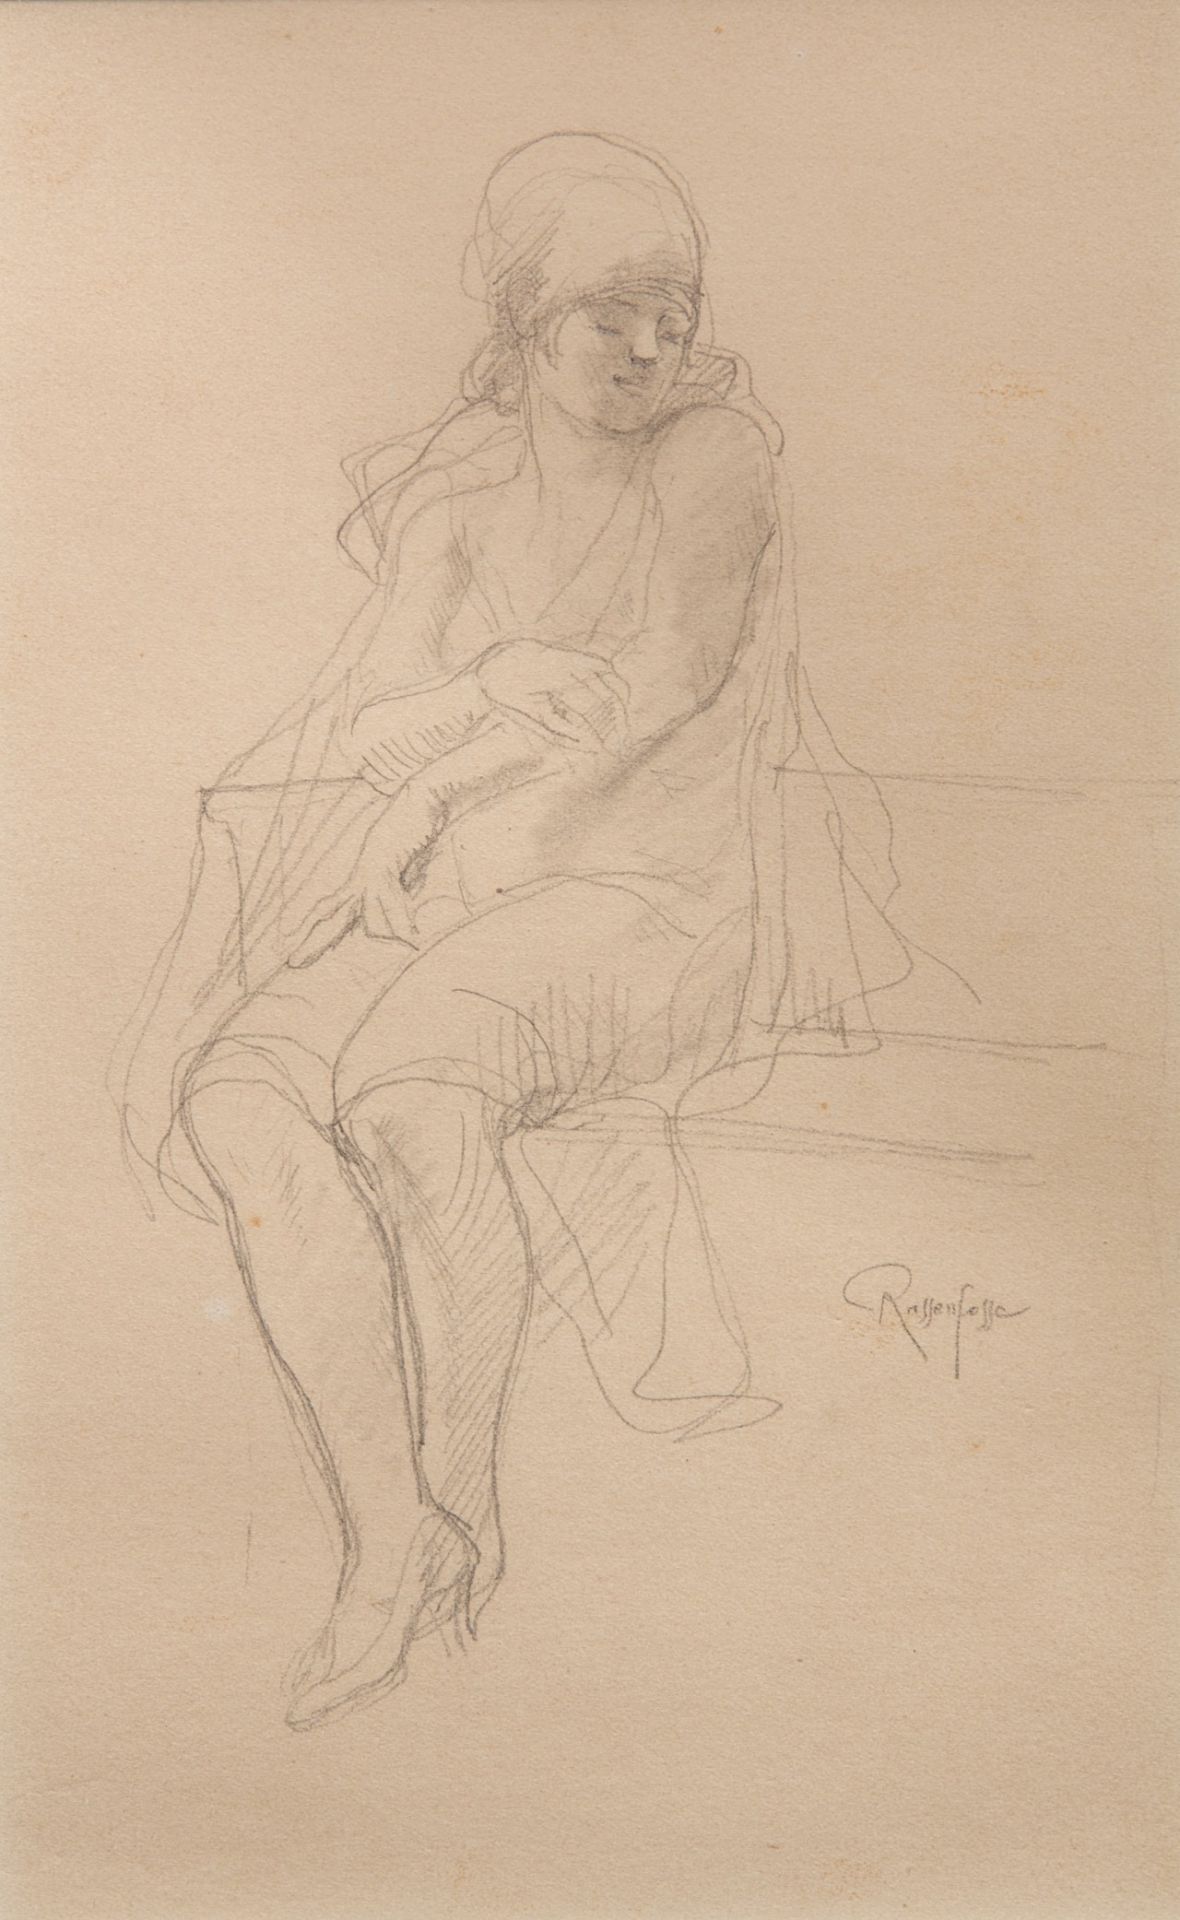 Armand Rassenfosse (1862-1934), seated girl, pencil drawing on paper 26 x 16.5 cm. (10.2 x 6 1/2 in.